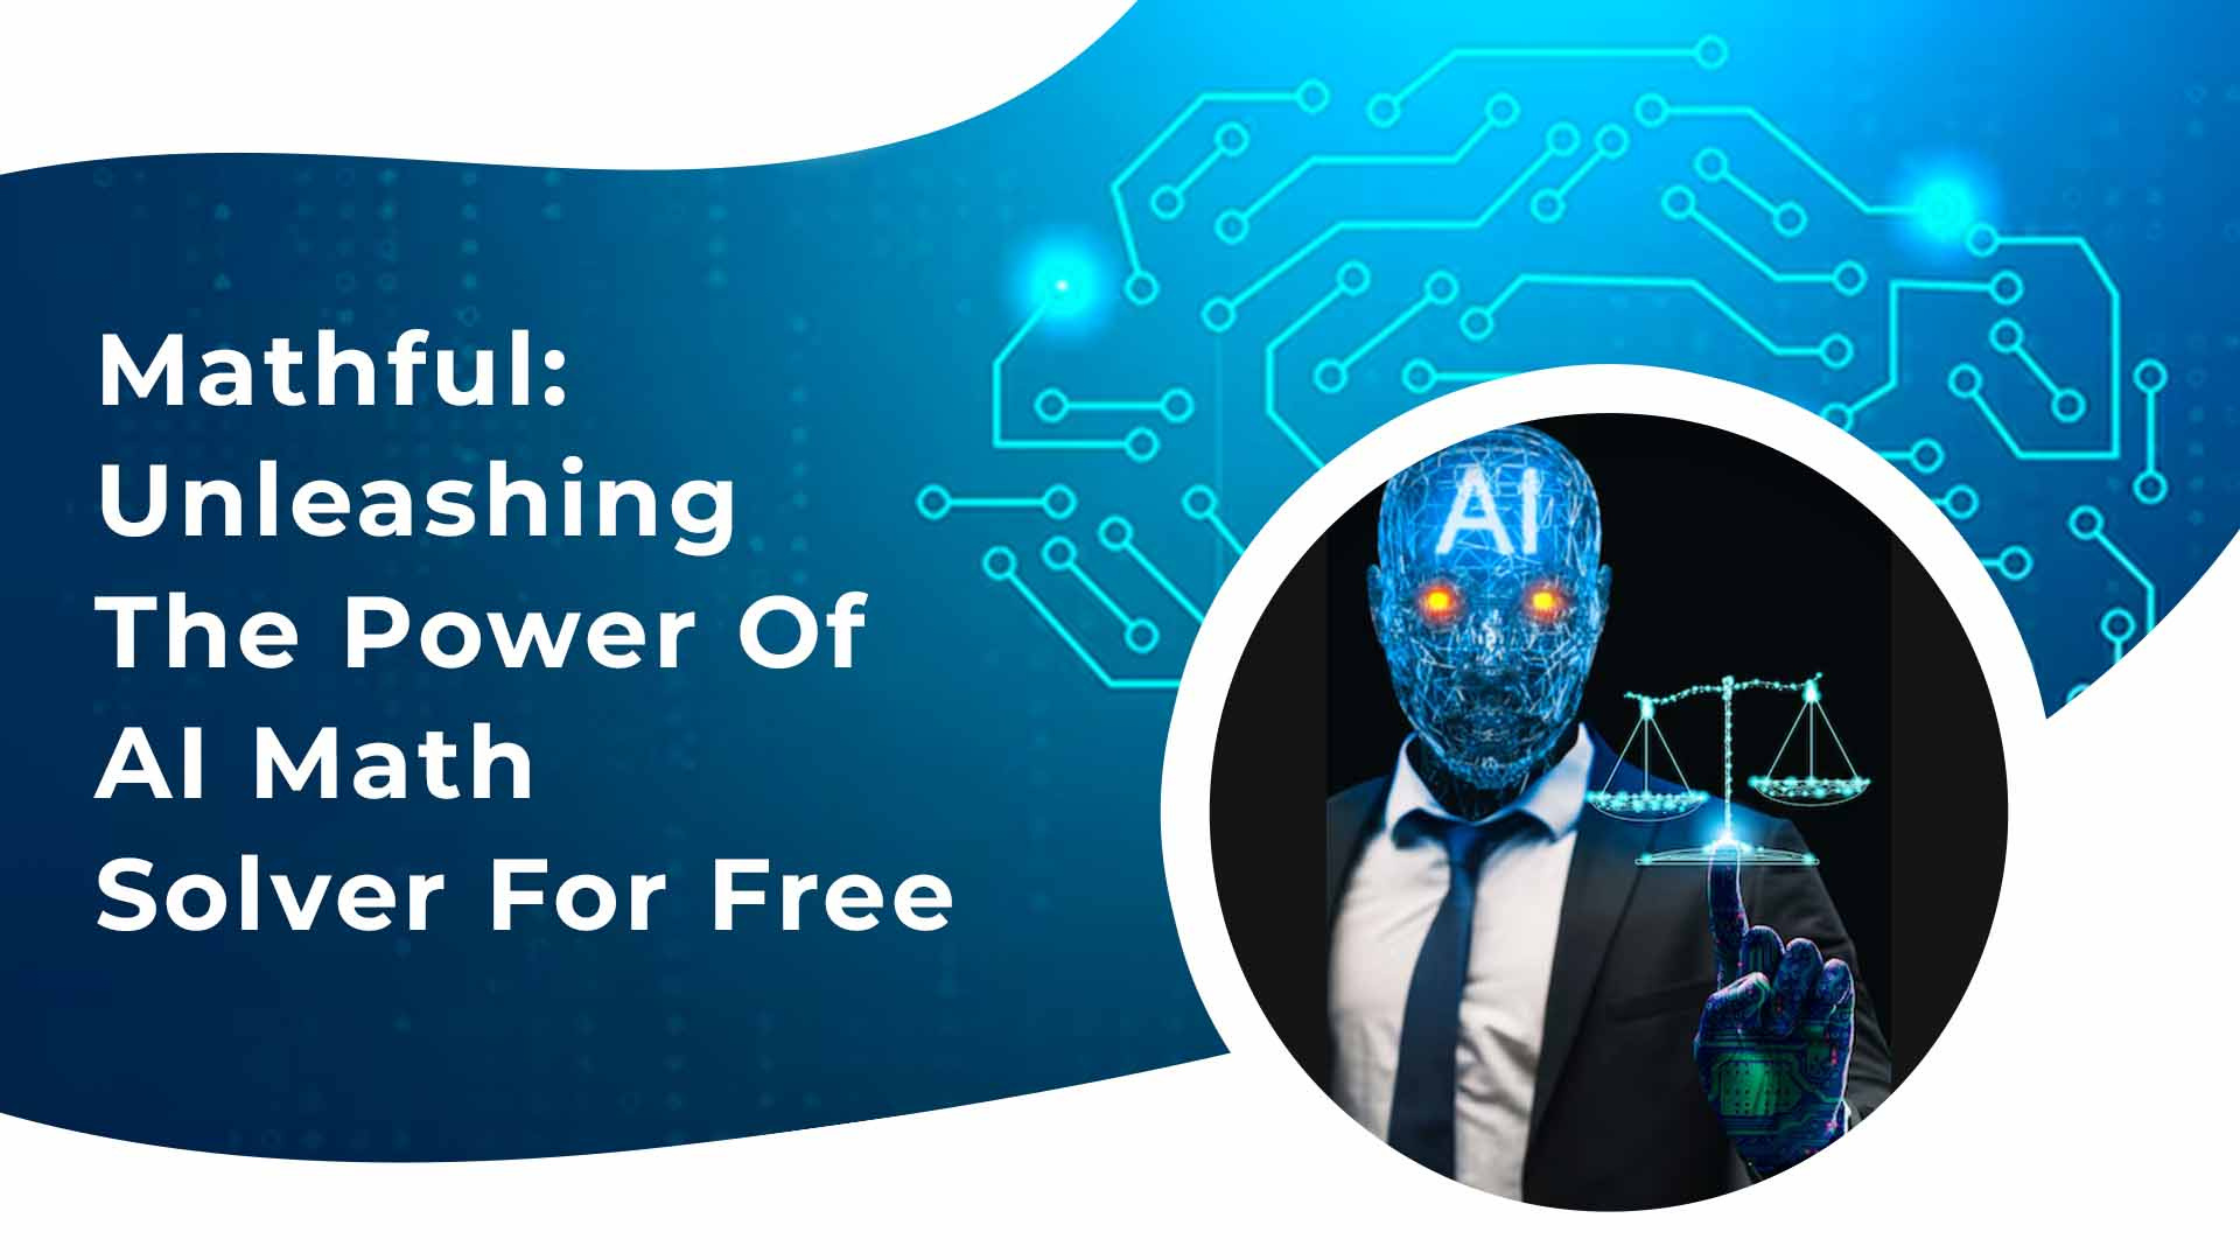 Mathful: Unleashing The Power Of AI Math Solver For Free